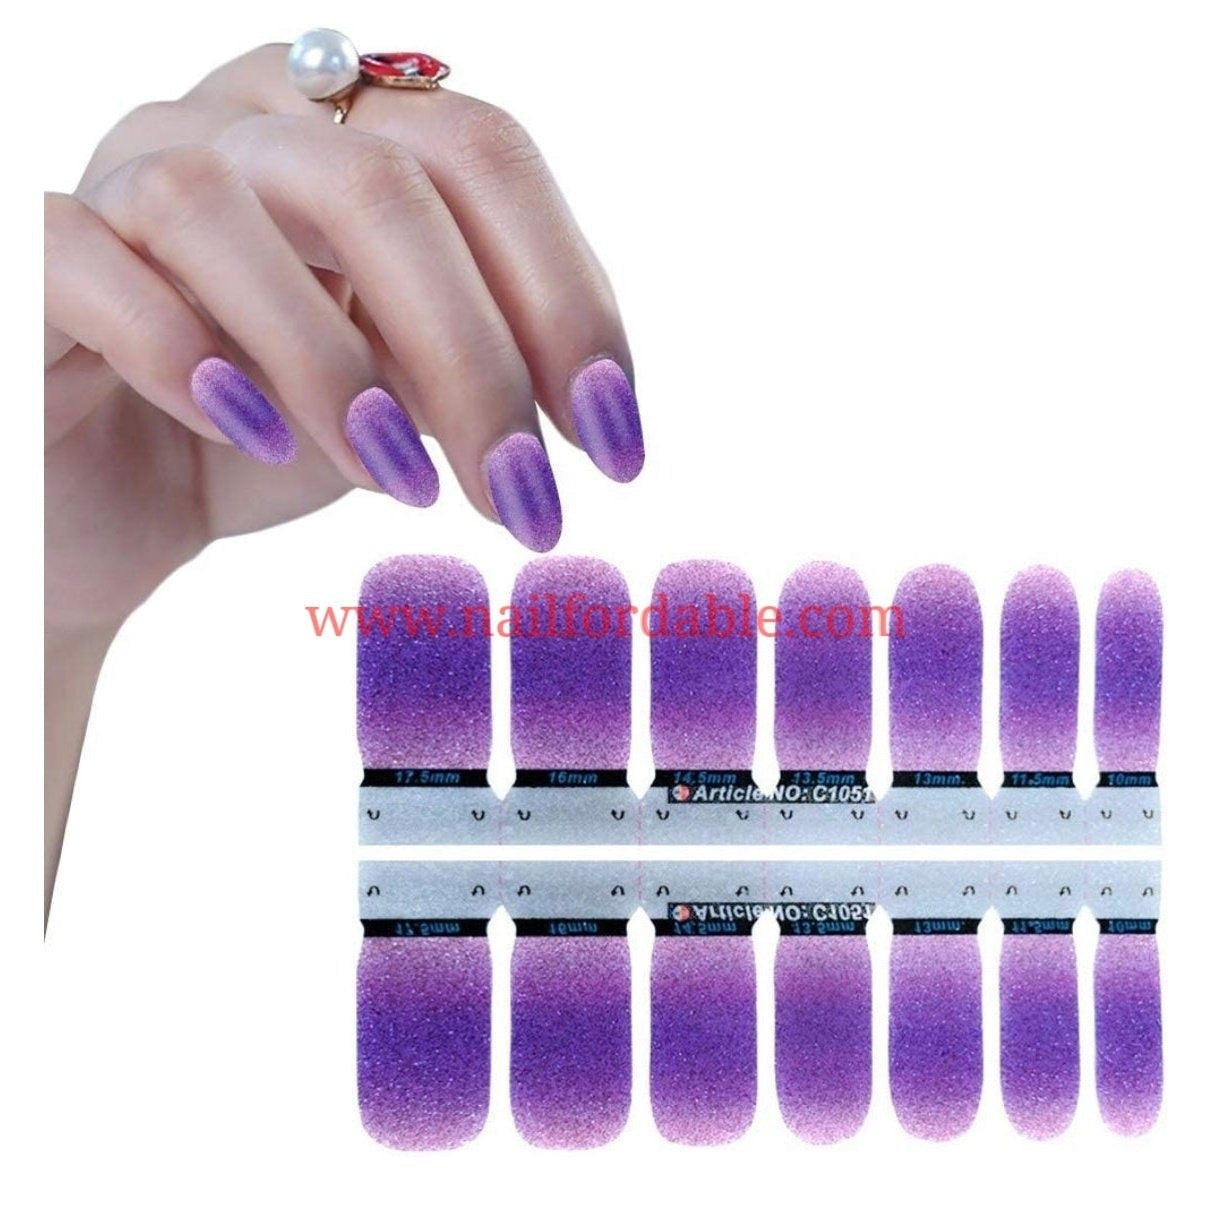 Fading Purple to Pink Nail Wraps | Semi Cured Gel Wraps | Gel Nail Wraps |Nail Polish | Nail Stickers